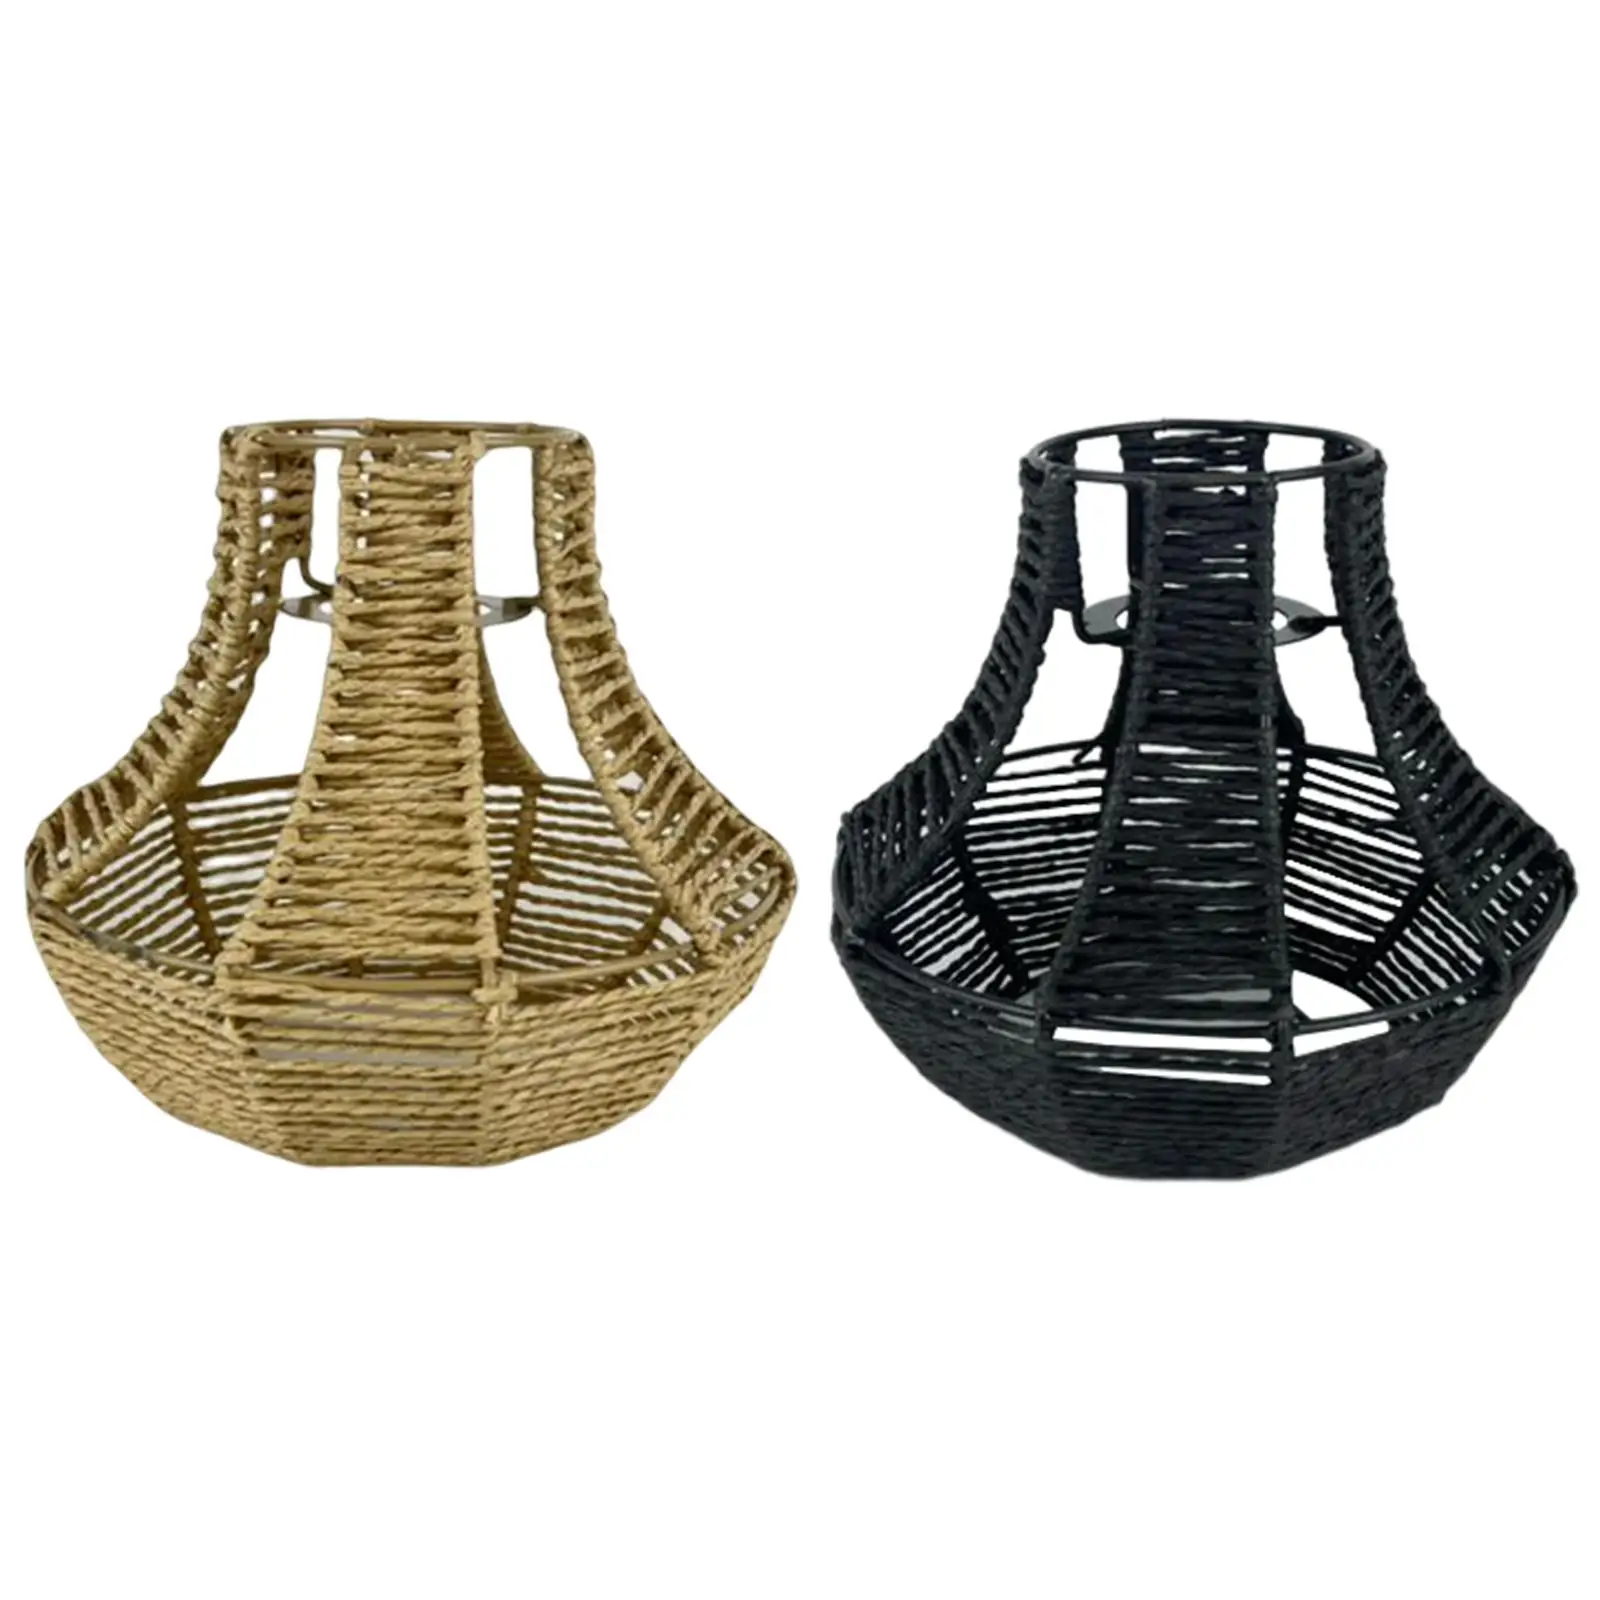 Weave Pendant Lamp Shade Rope Rattan Chandelier Cover, Easy Installation